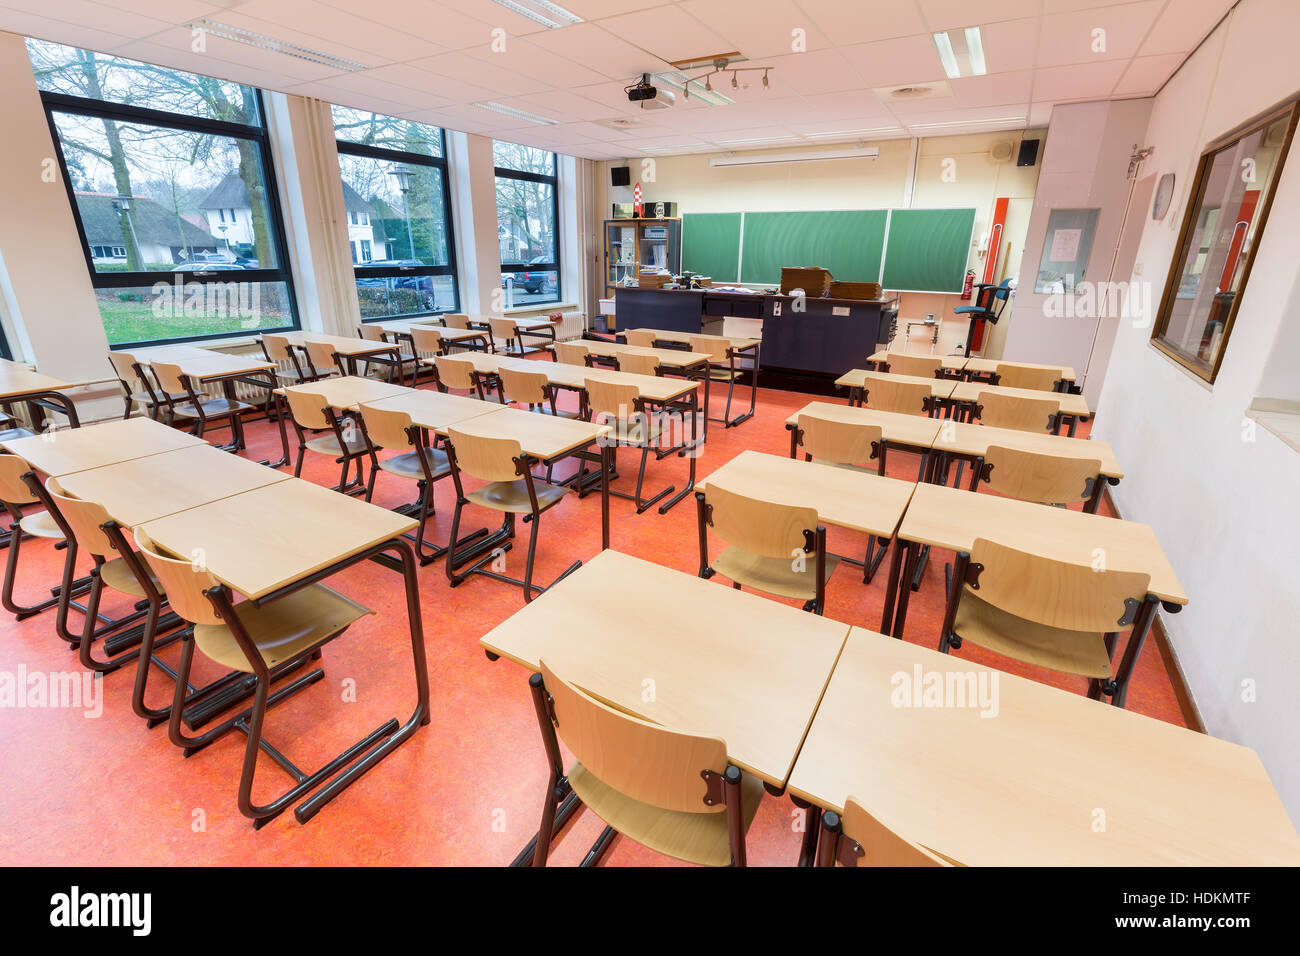 Theory classroom in high school no people Stock Photo